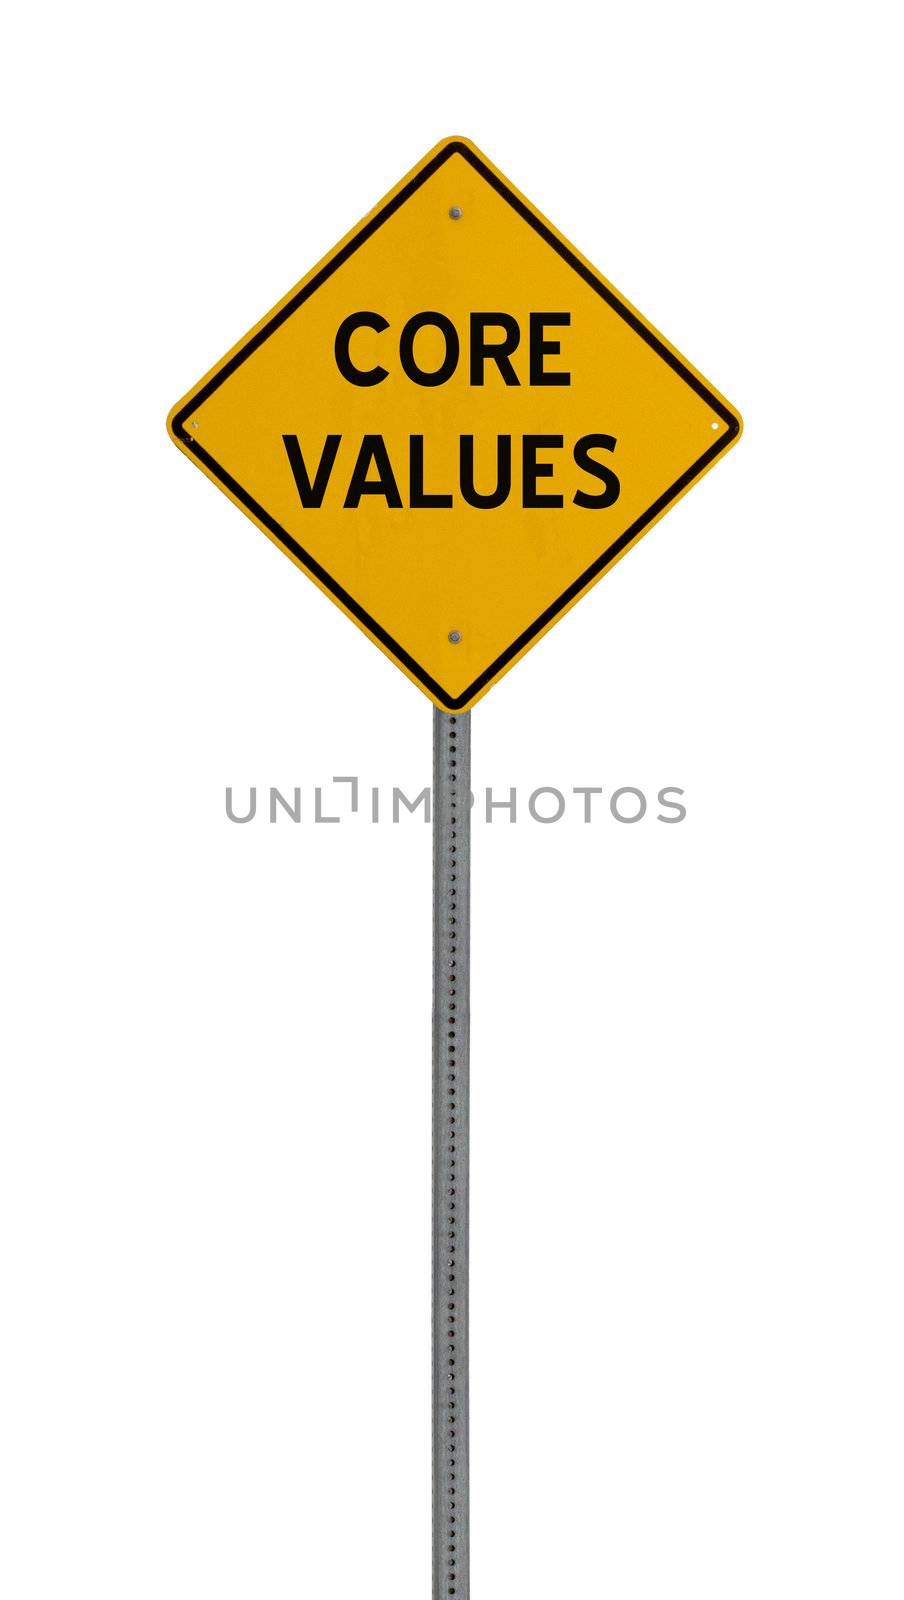 core values - Yellow road warning sign by jeremywhat